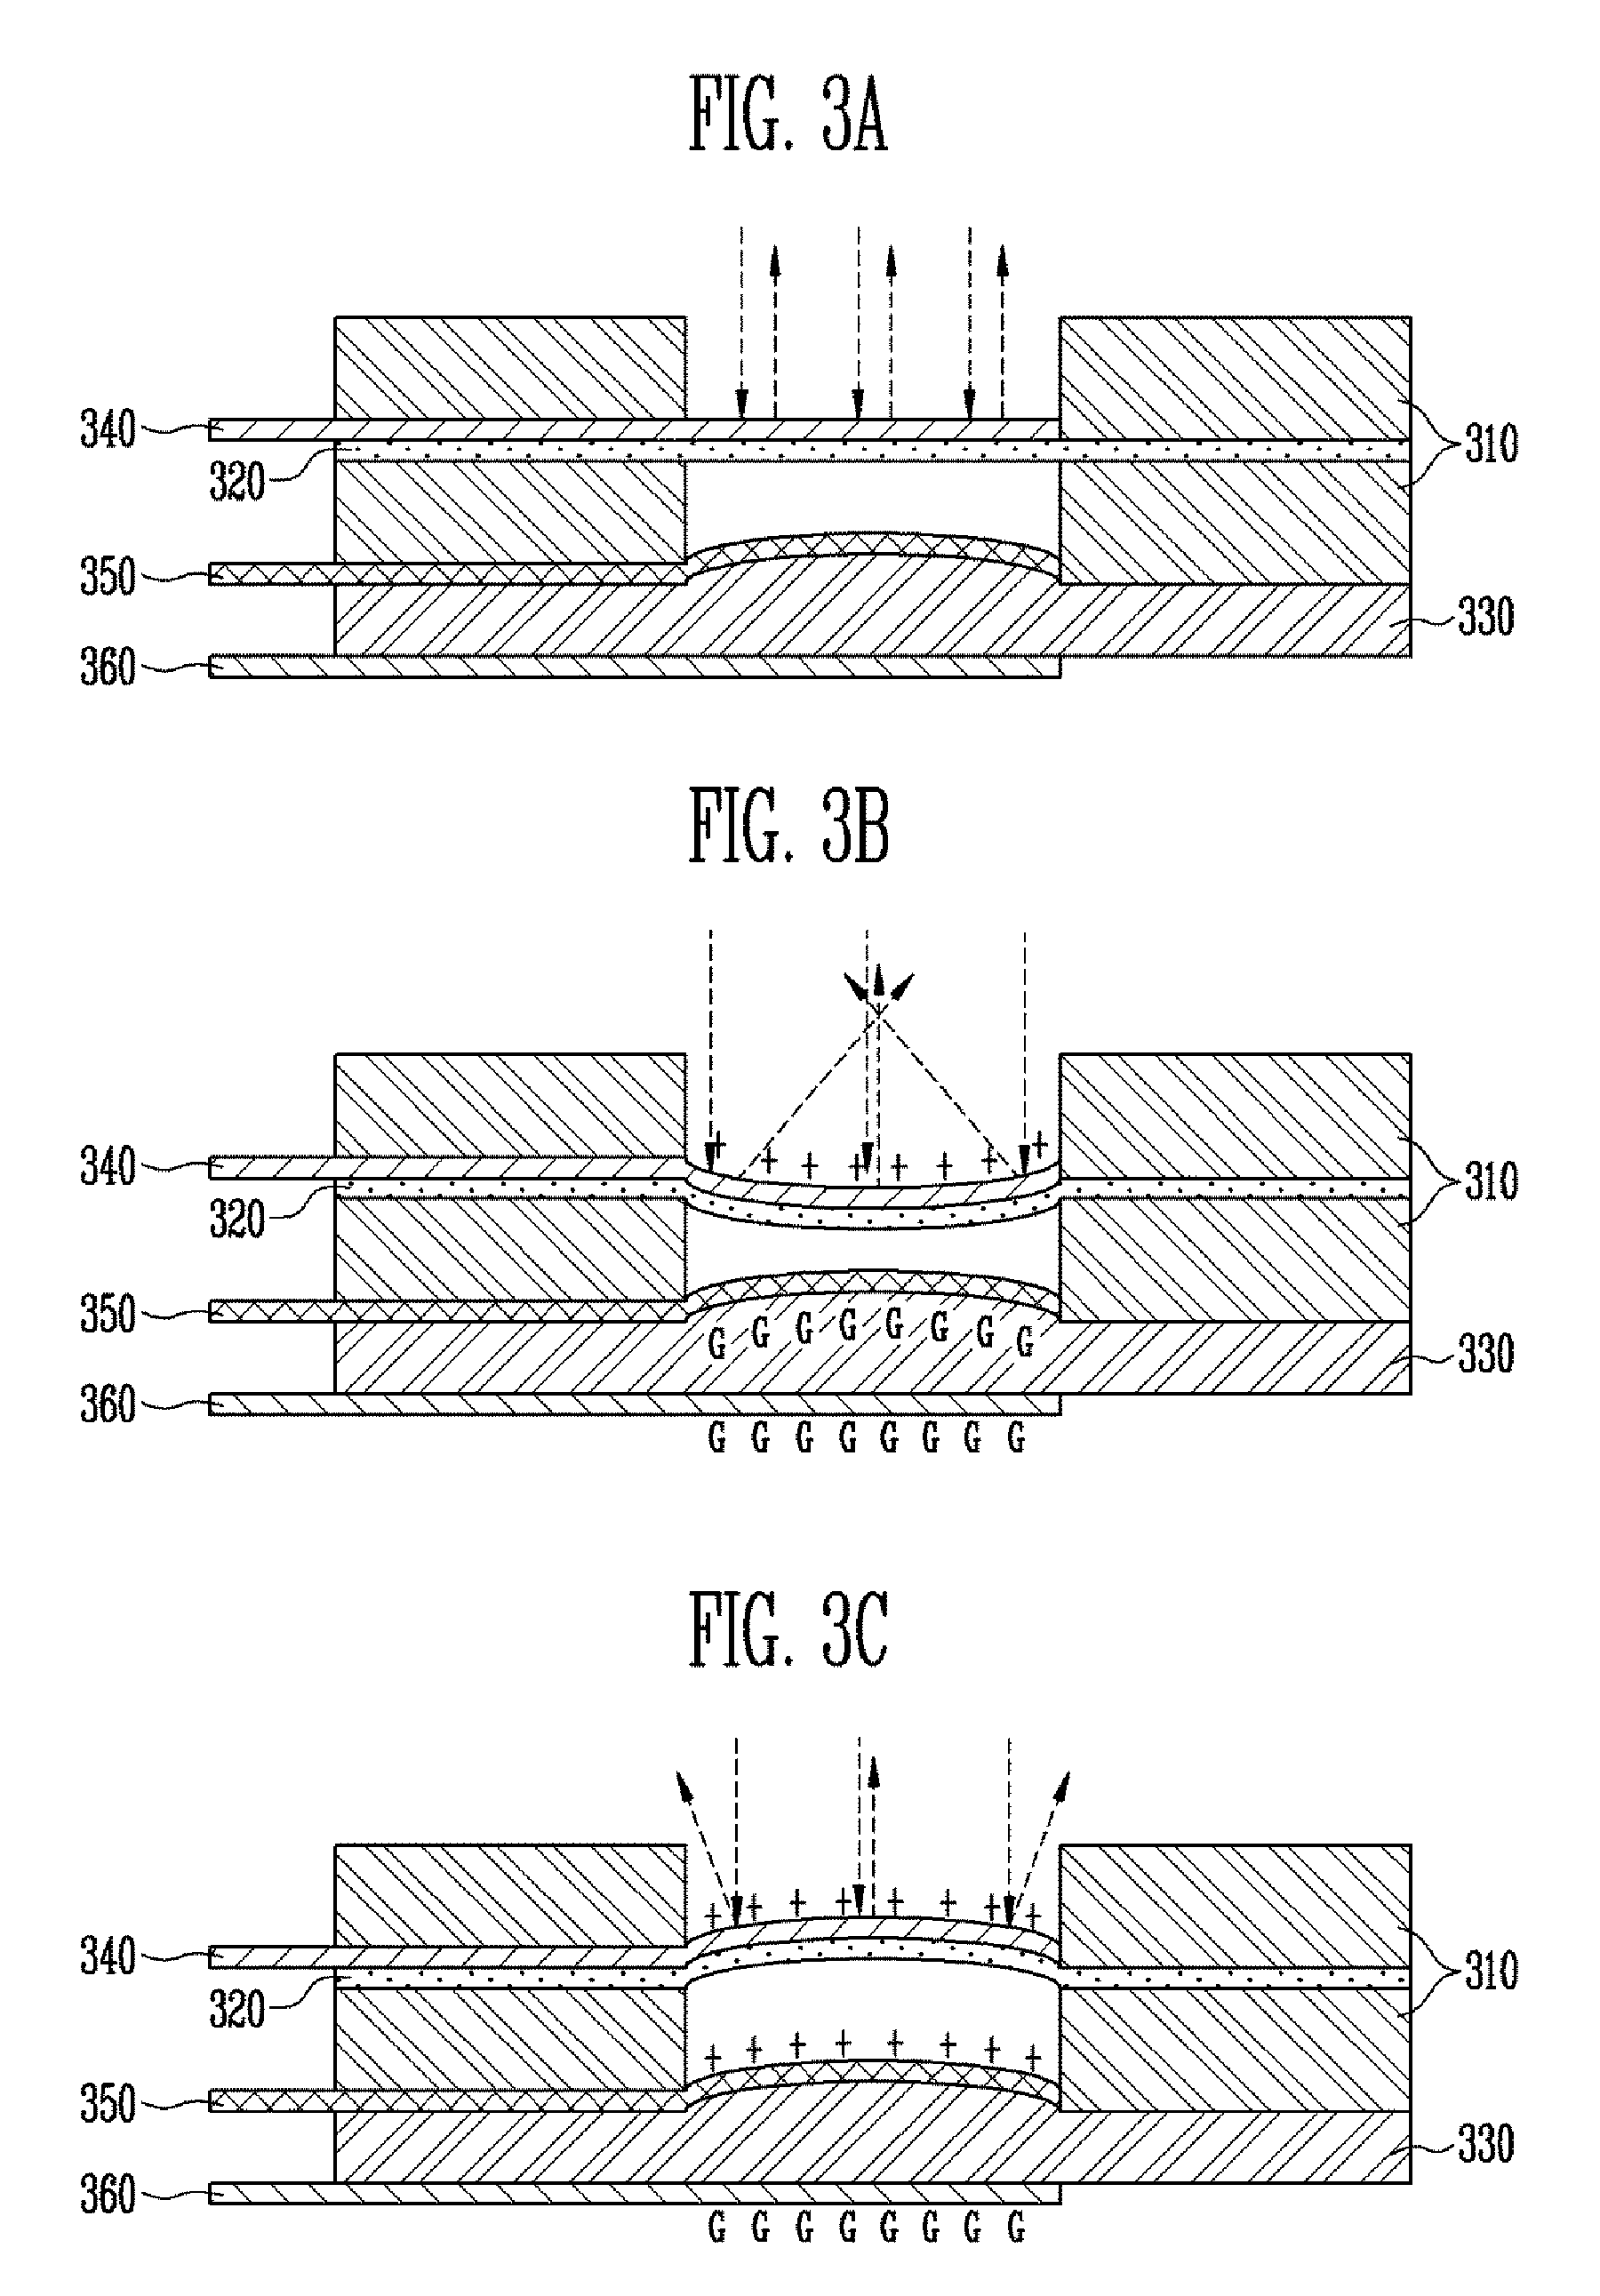 Active reflective lens and apparatus using the same